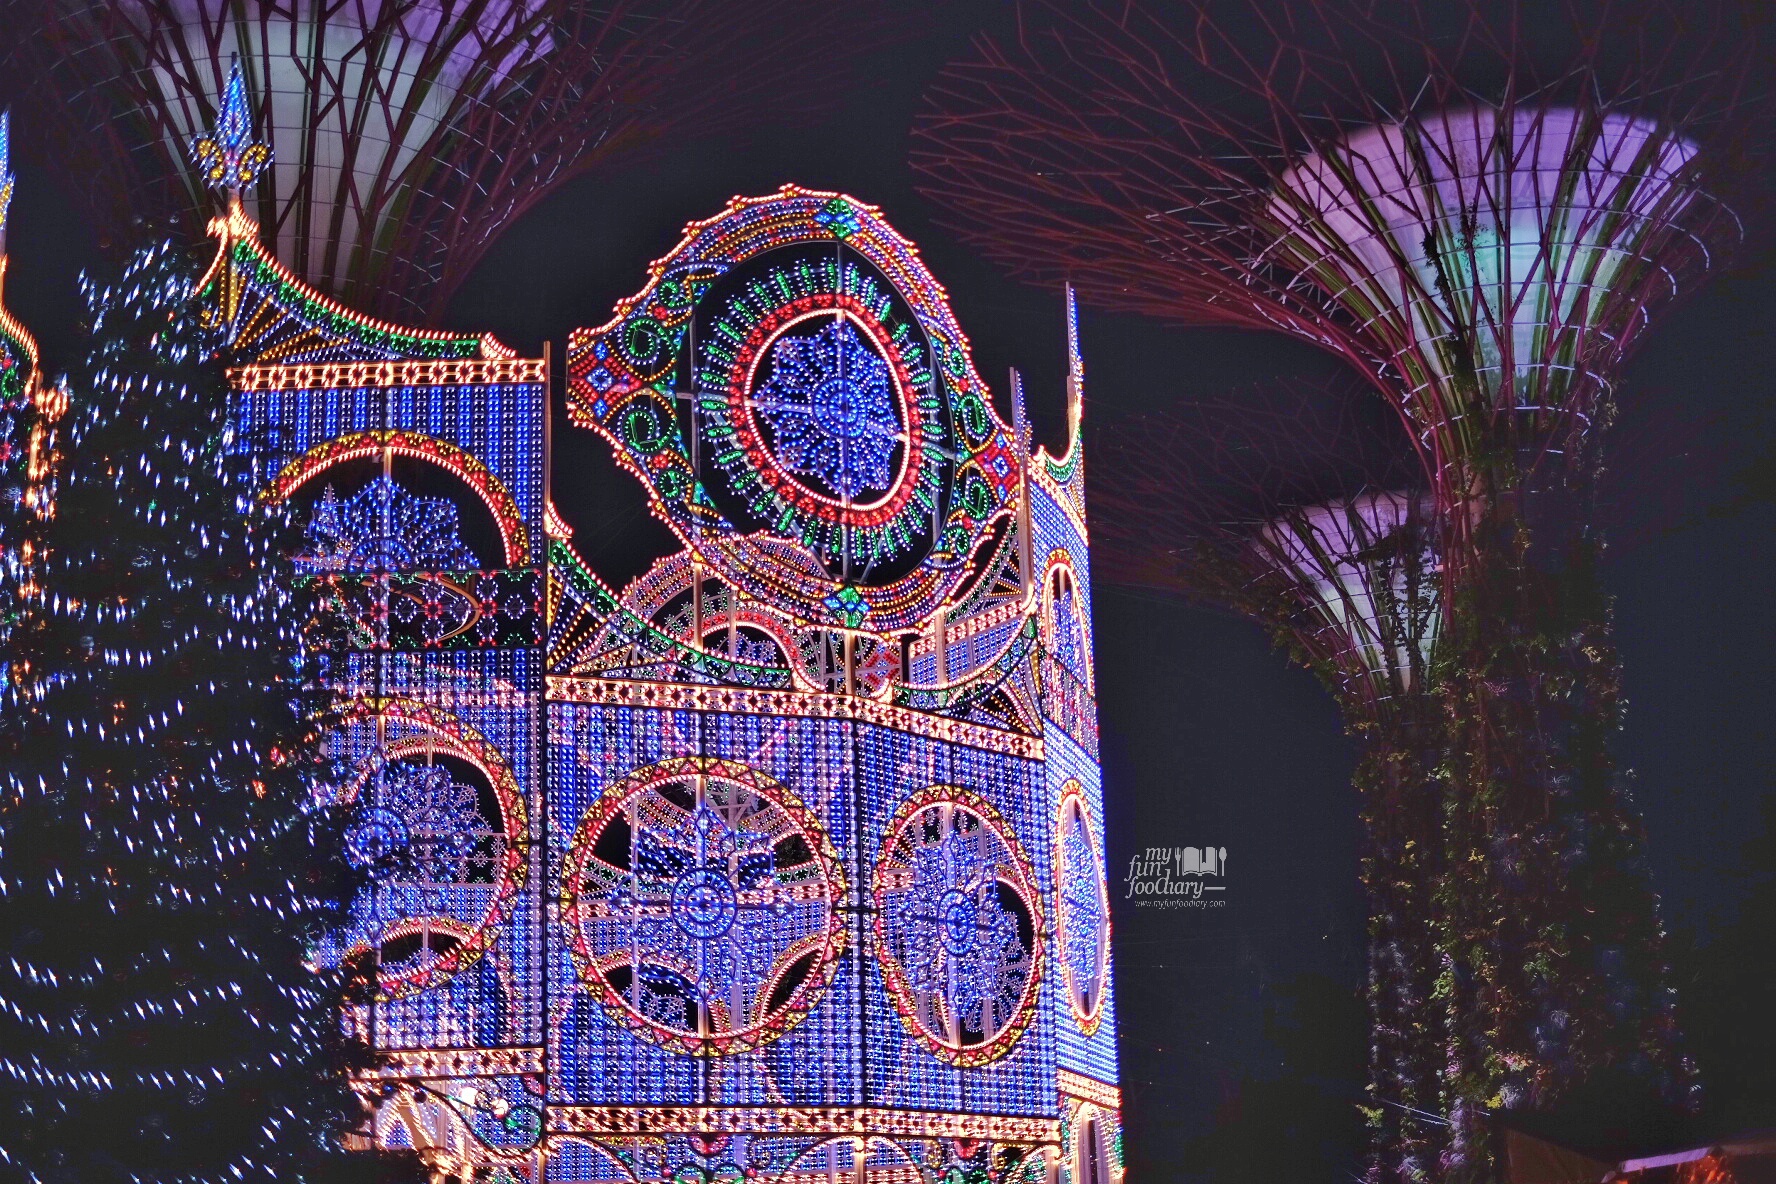 Luminarie Light Sculptures for Christmas Wonderland at Gardens By The Bay by Myfunfoodiary